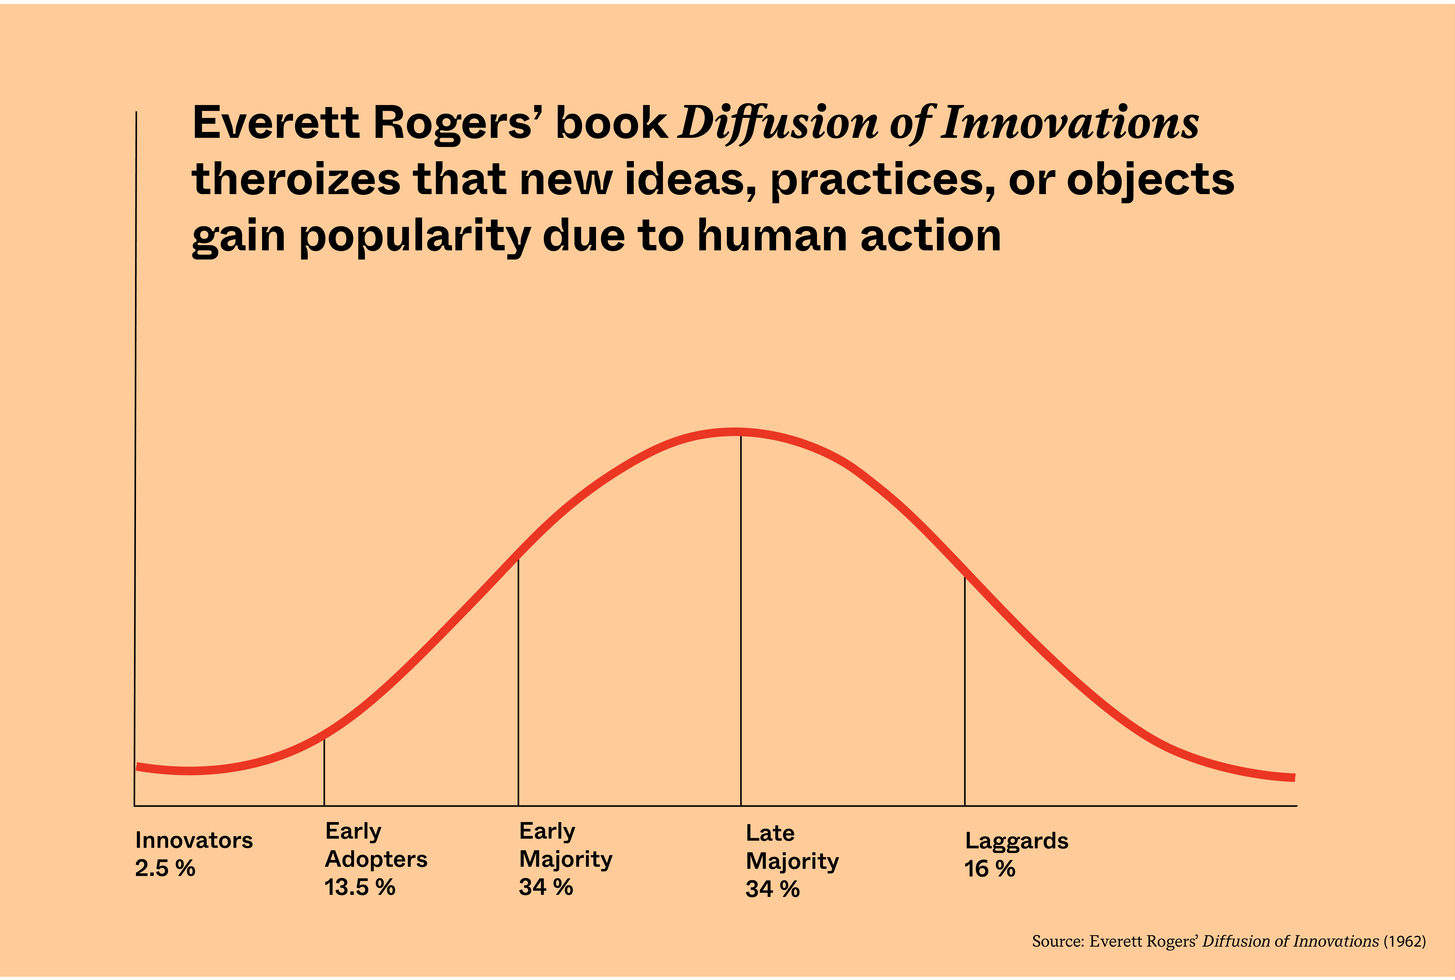 Everett Roger's Diffusion of Innovations bell curve. May 2021